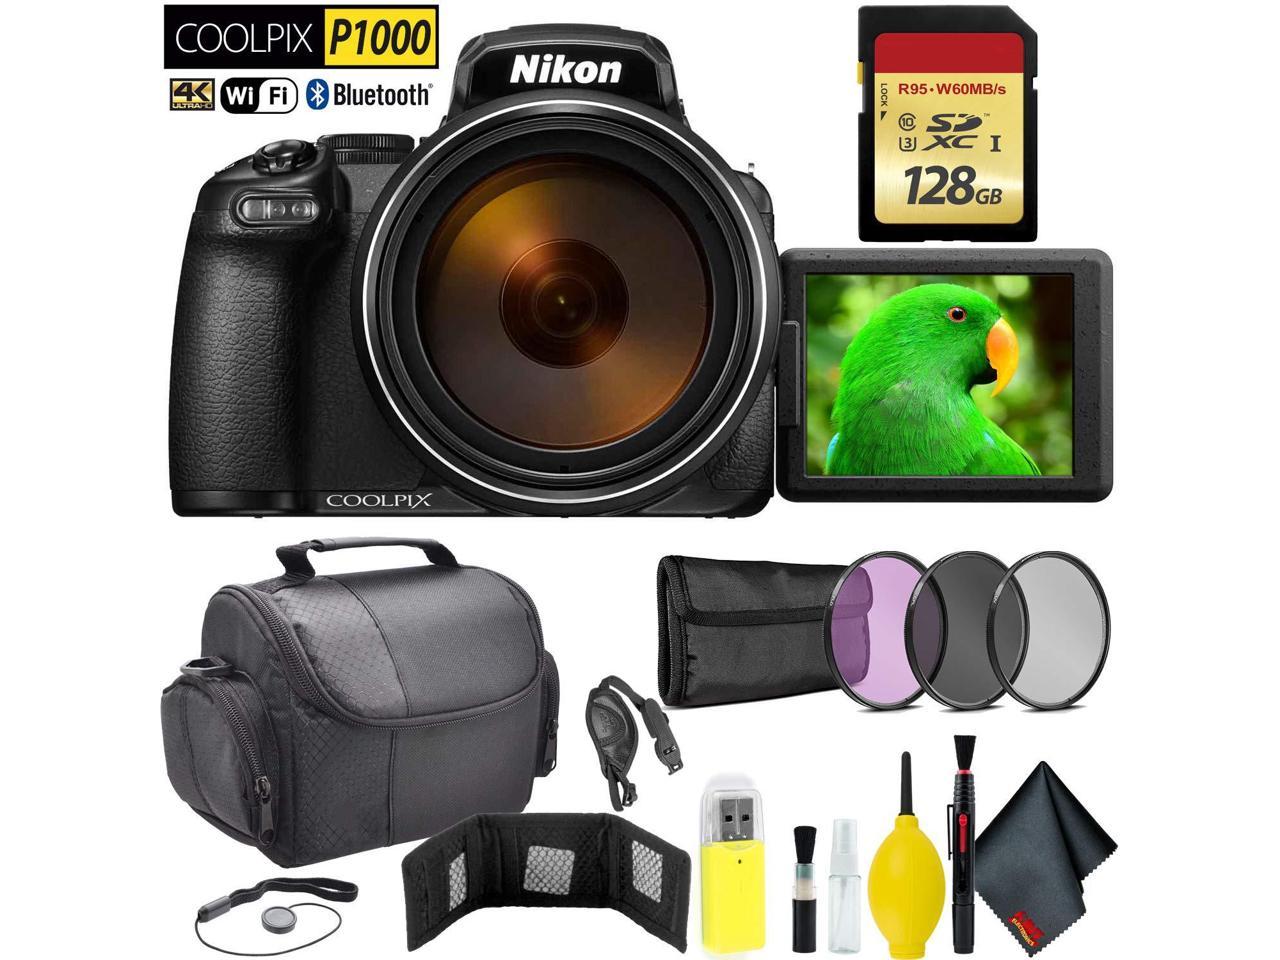 Professional Accessory KIT for Nikon COOLPIX P900 Includes Wide Angle Lens Macro Lens TELEPHOTO Zoom Lens Carrying CASE Flash for Nikon COOLPIX P900 